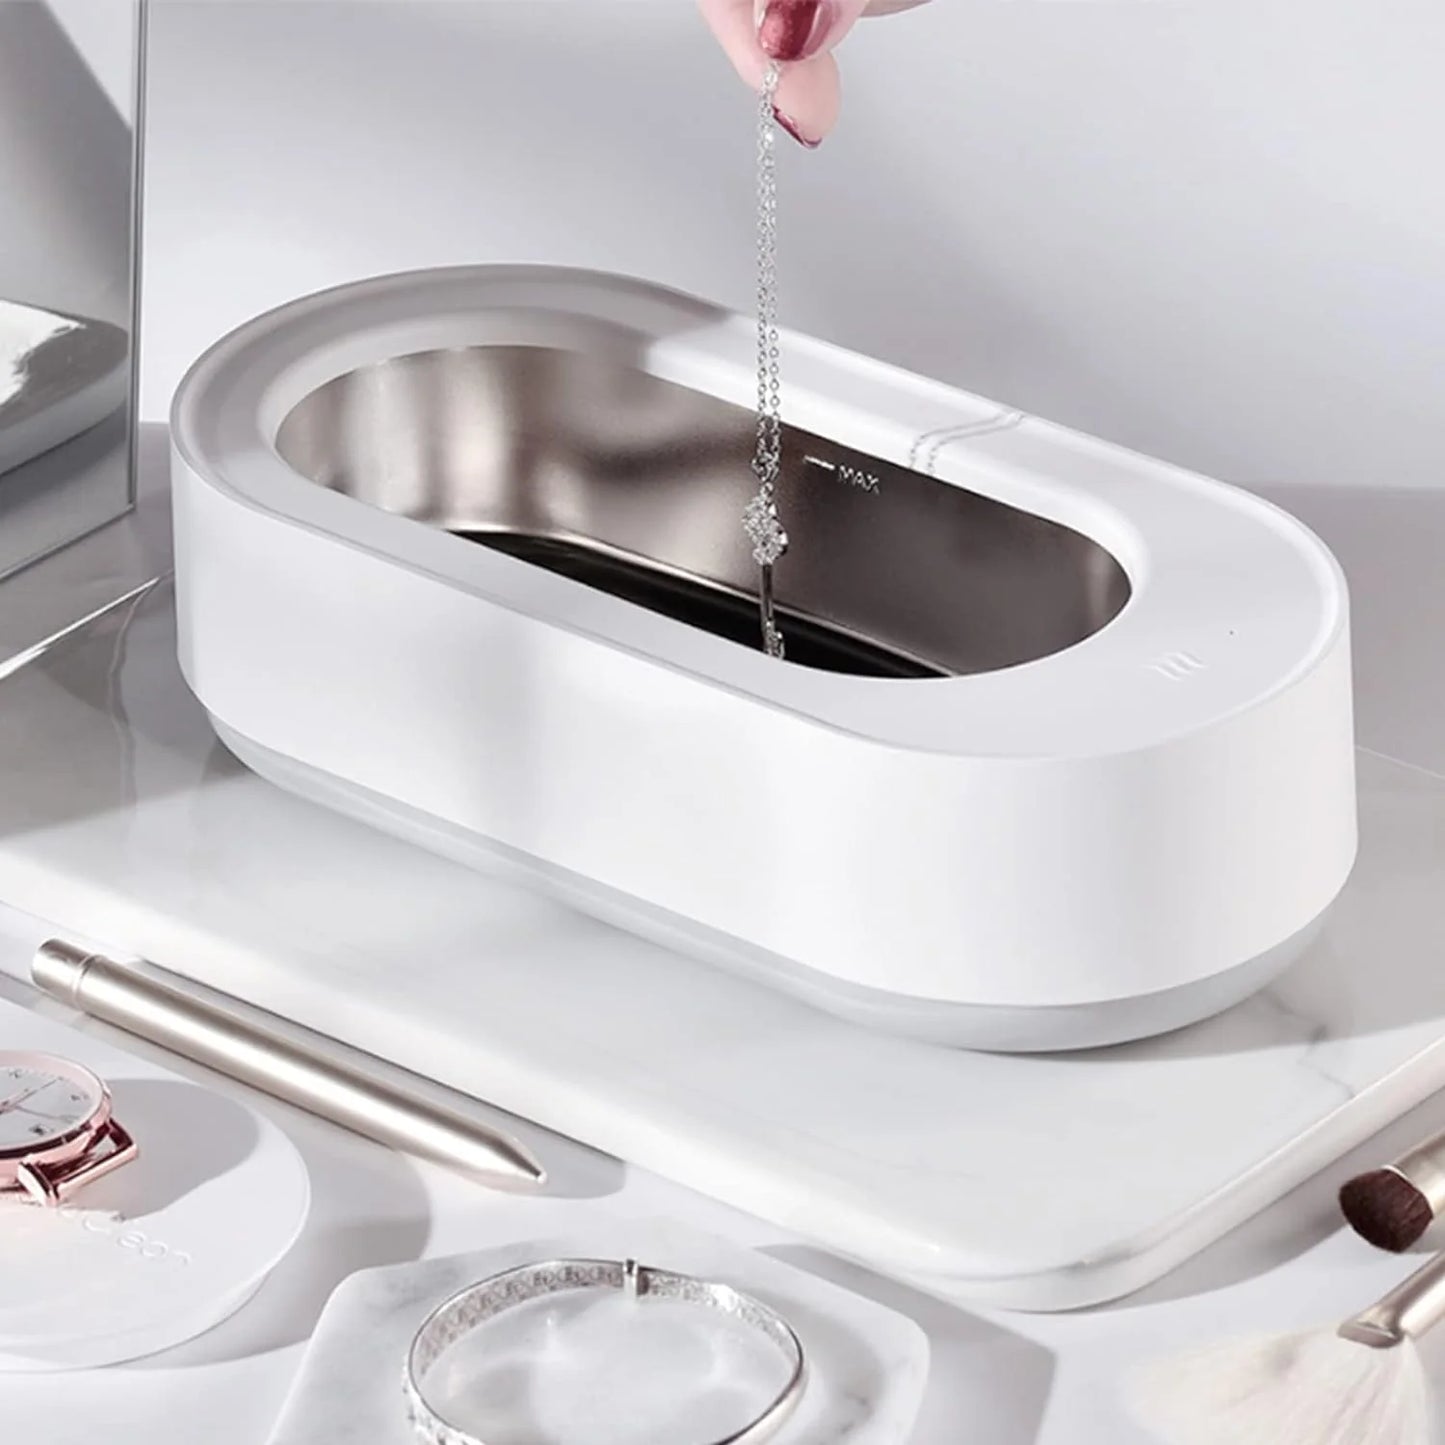 The Ultrasonic All-in-One Cleaning Machine